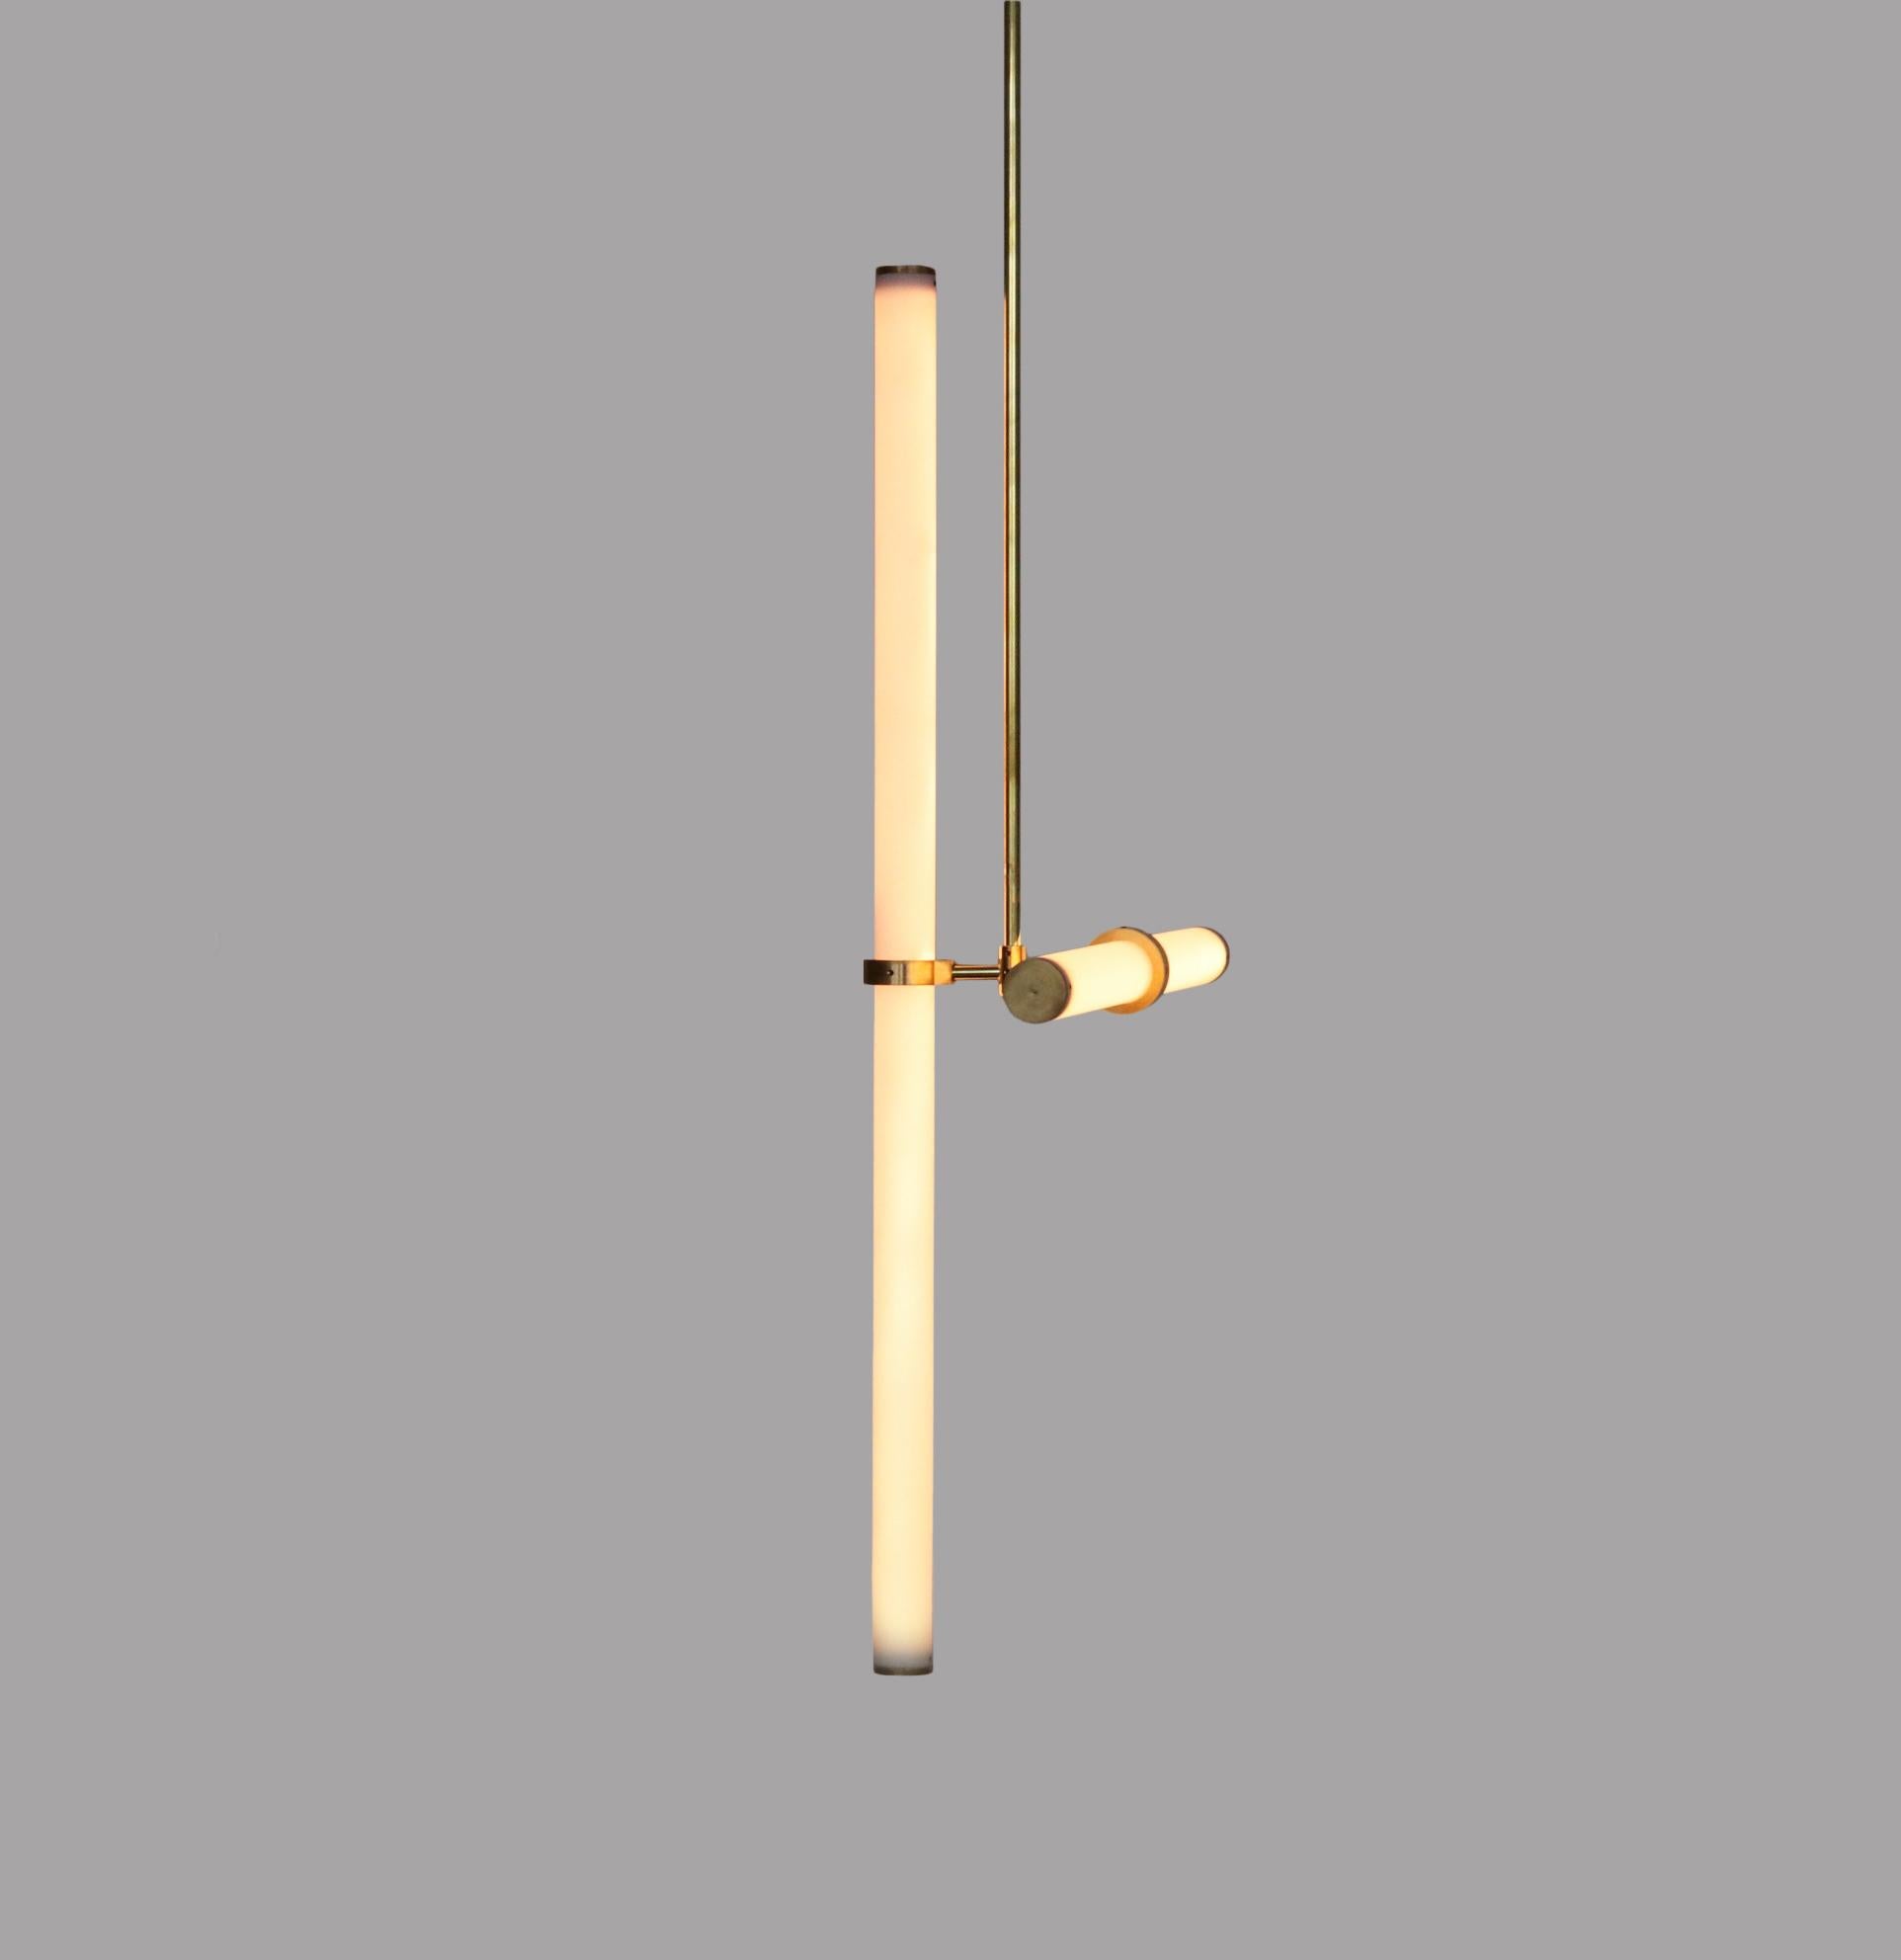 Light object 019 by Naama Hofman
Dimensions: W 40, H 120 cm (height to order)
Light tube diameter: 35 mm
Light tube length: 1 x 80 cm and 1 x 40 cm
Brass pipe diameter: 10 mm
Canopy diameter: 20 cm

Voltage: 110-240
CE Approved

Materials: